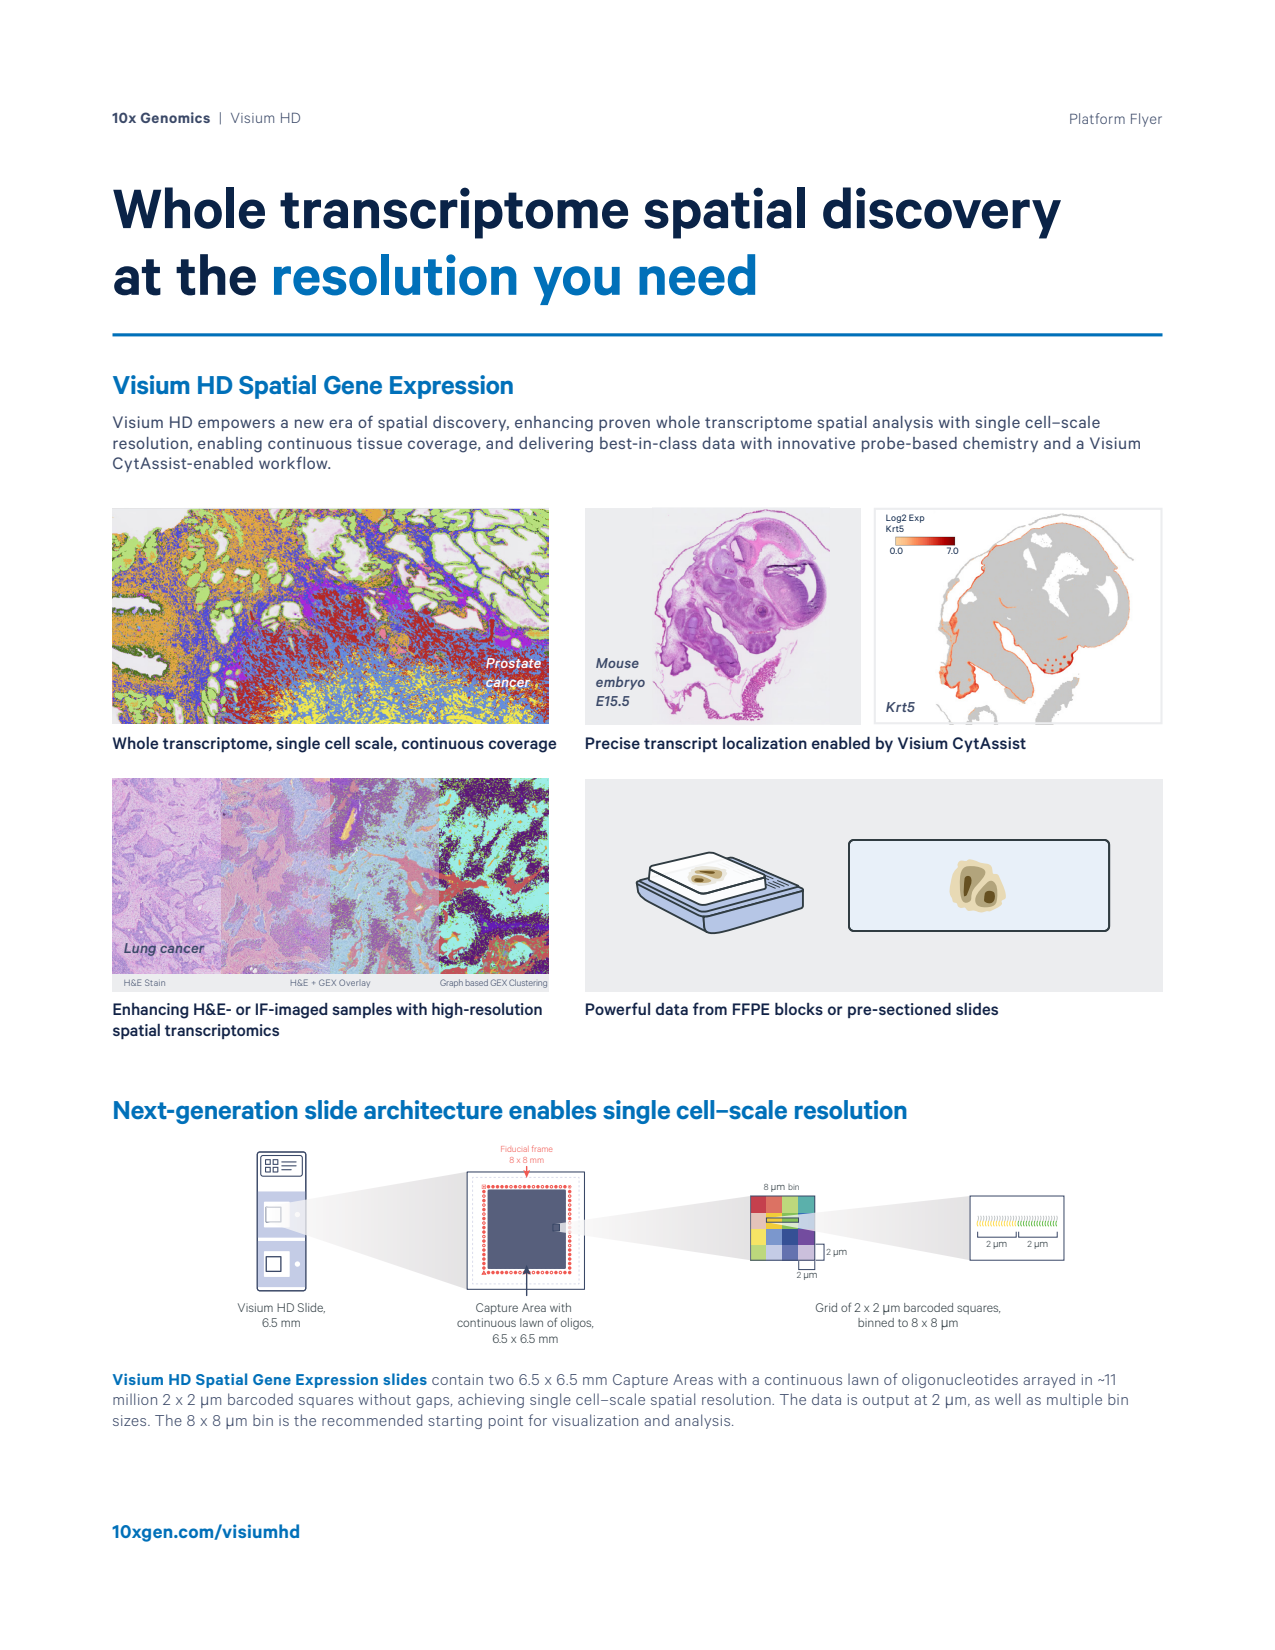 Visium HD: Whole transcriptome spatial discovery at the resolution you need